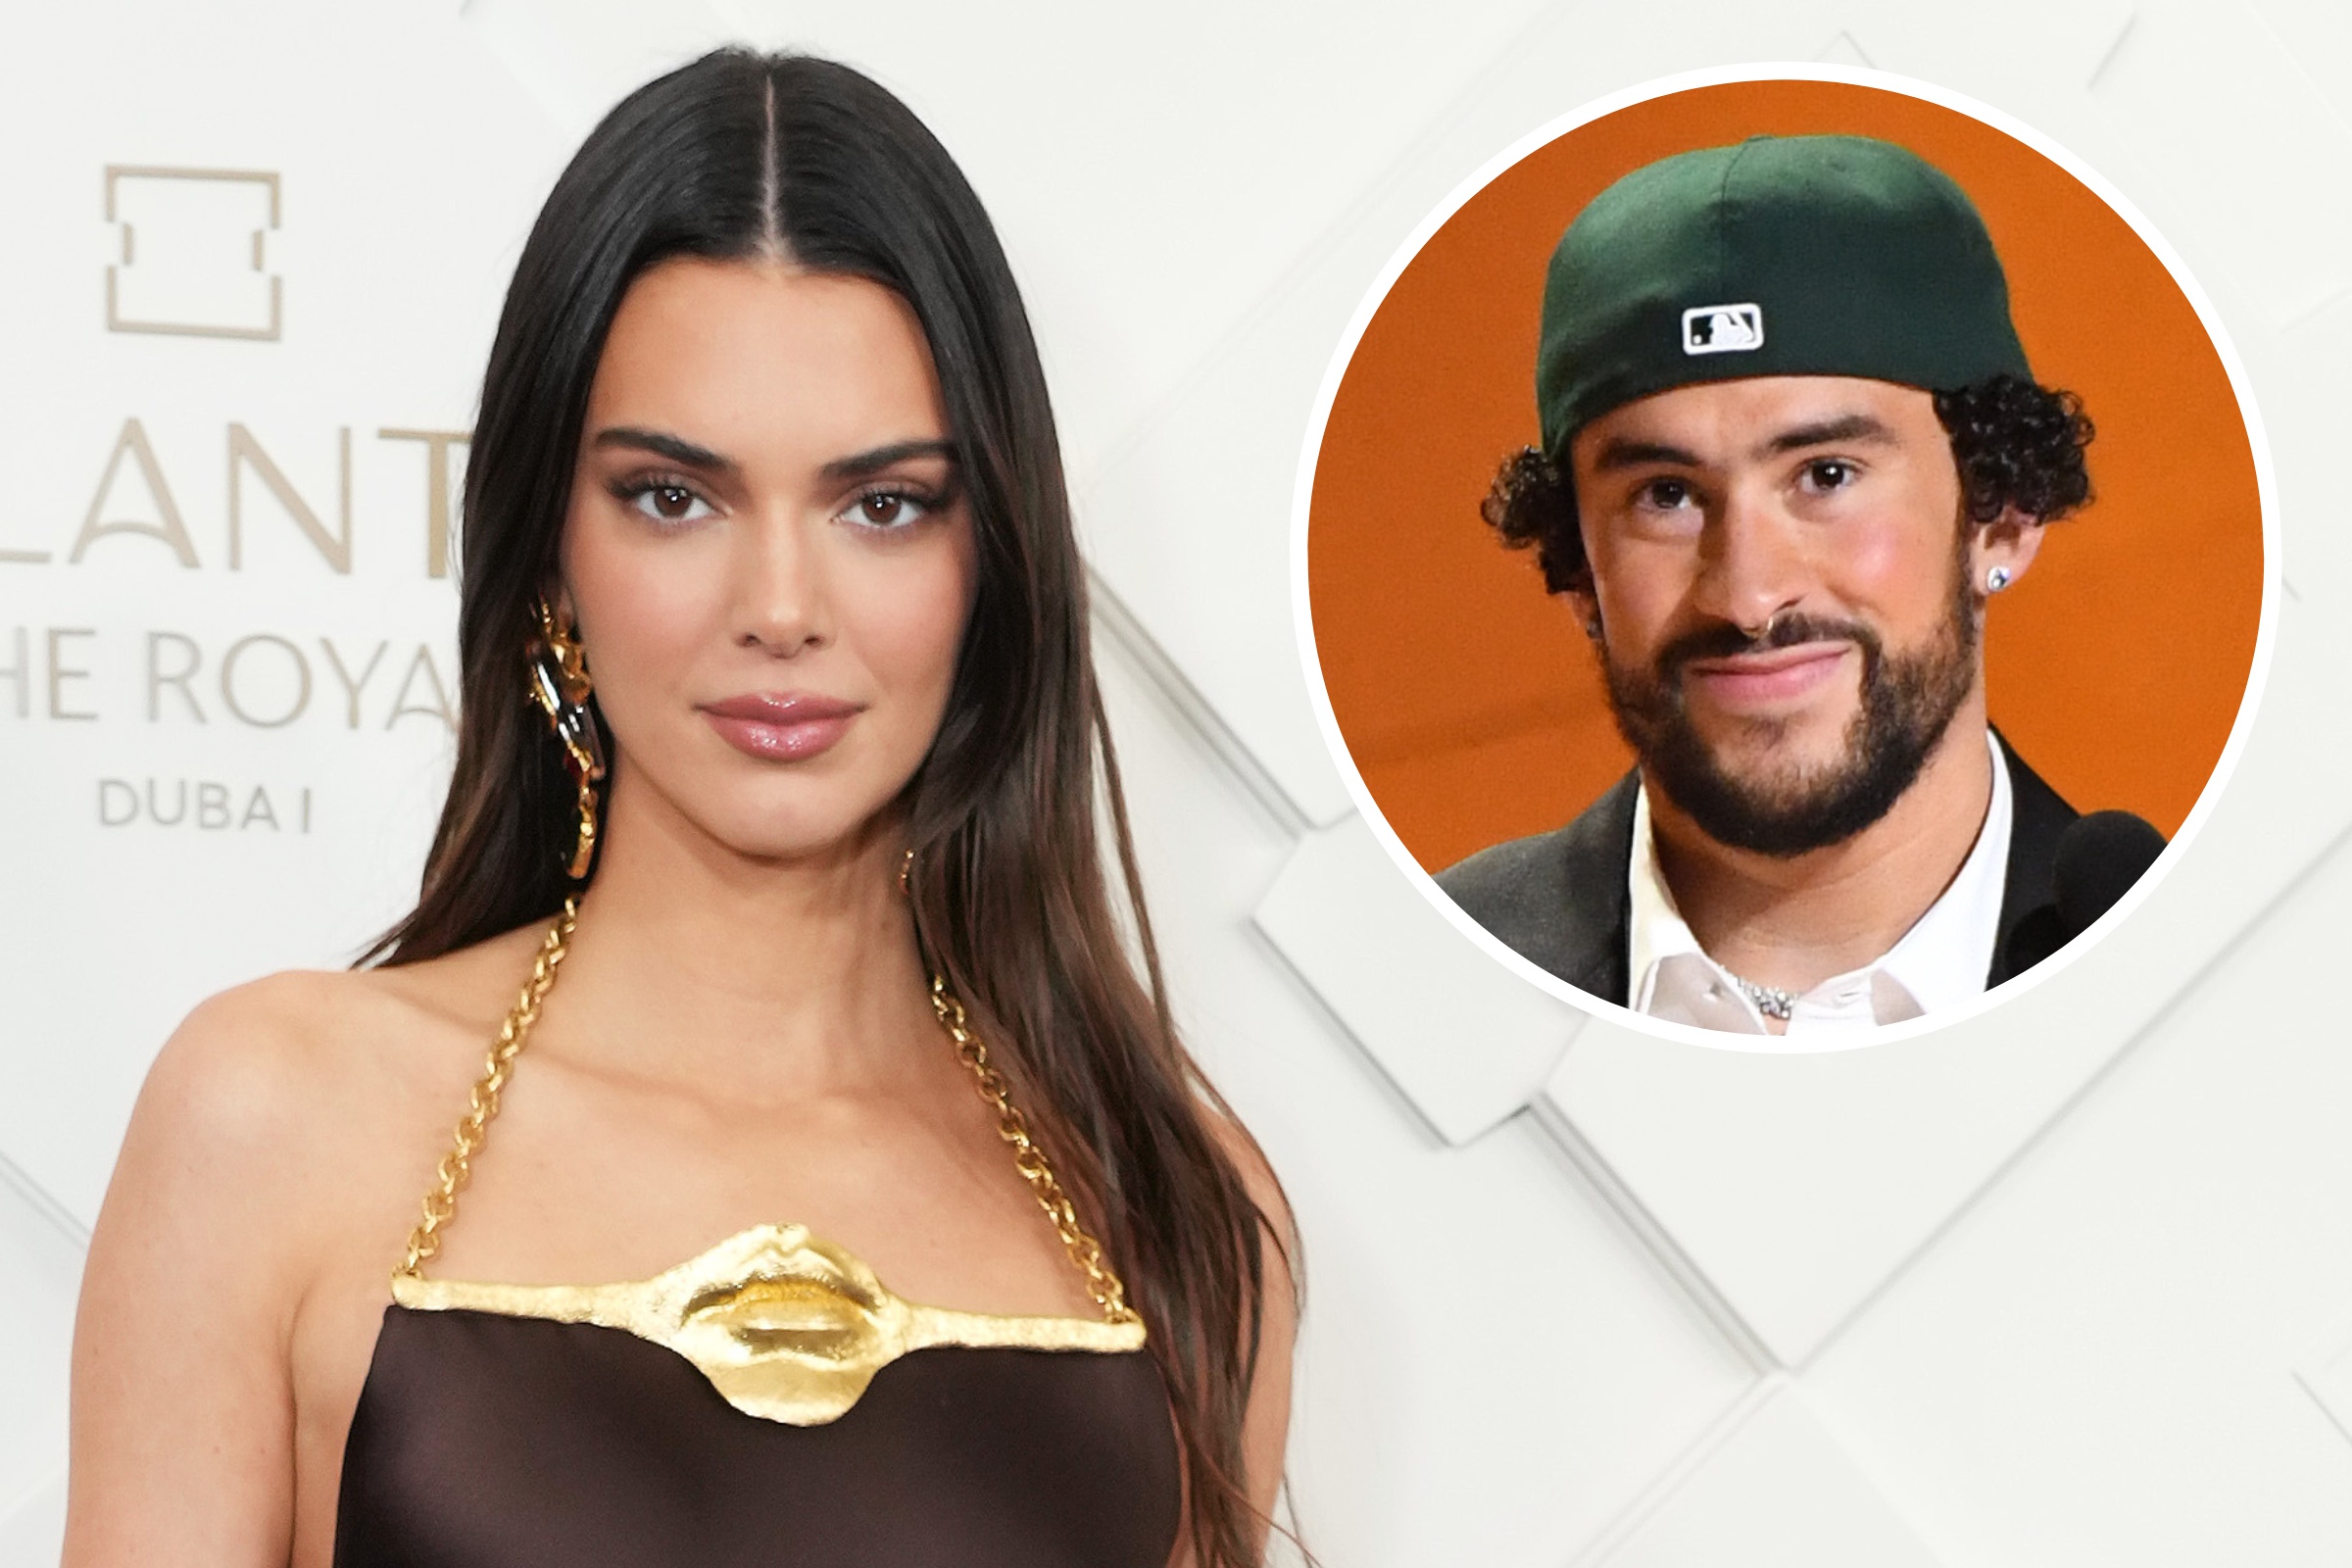 Are Kendall Jenner and Bad Bunny Dating? What We Know